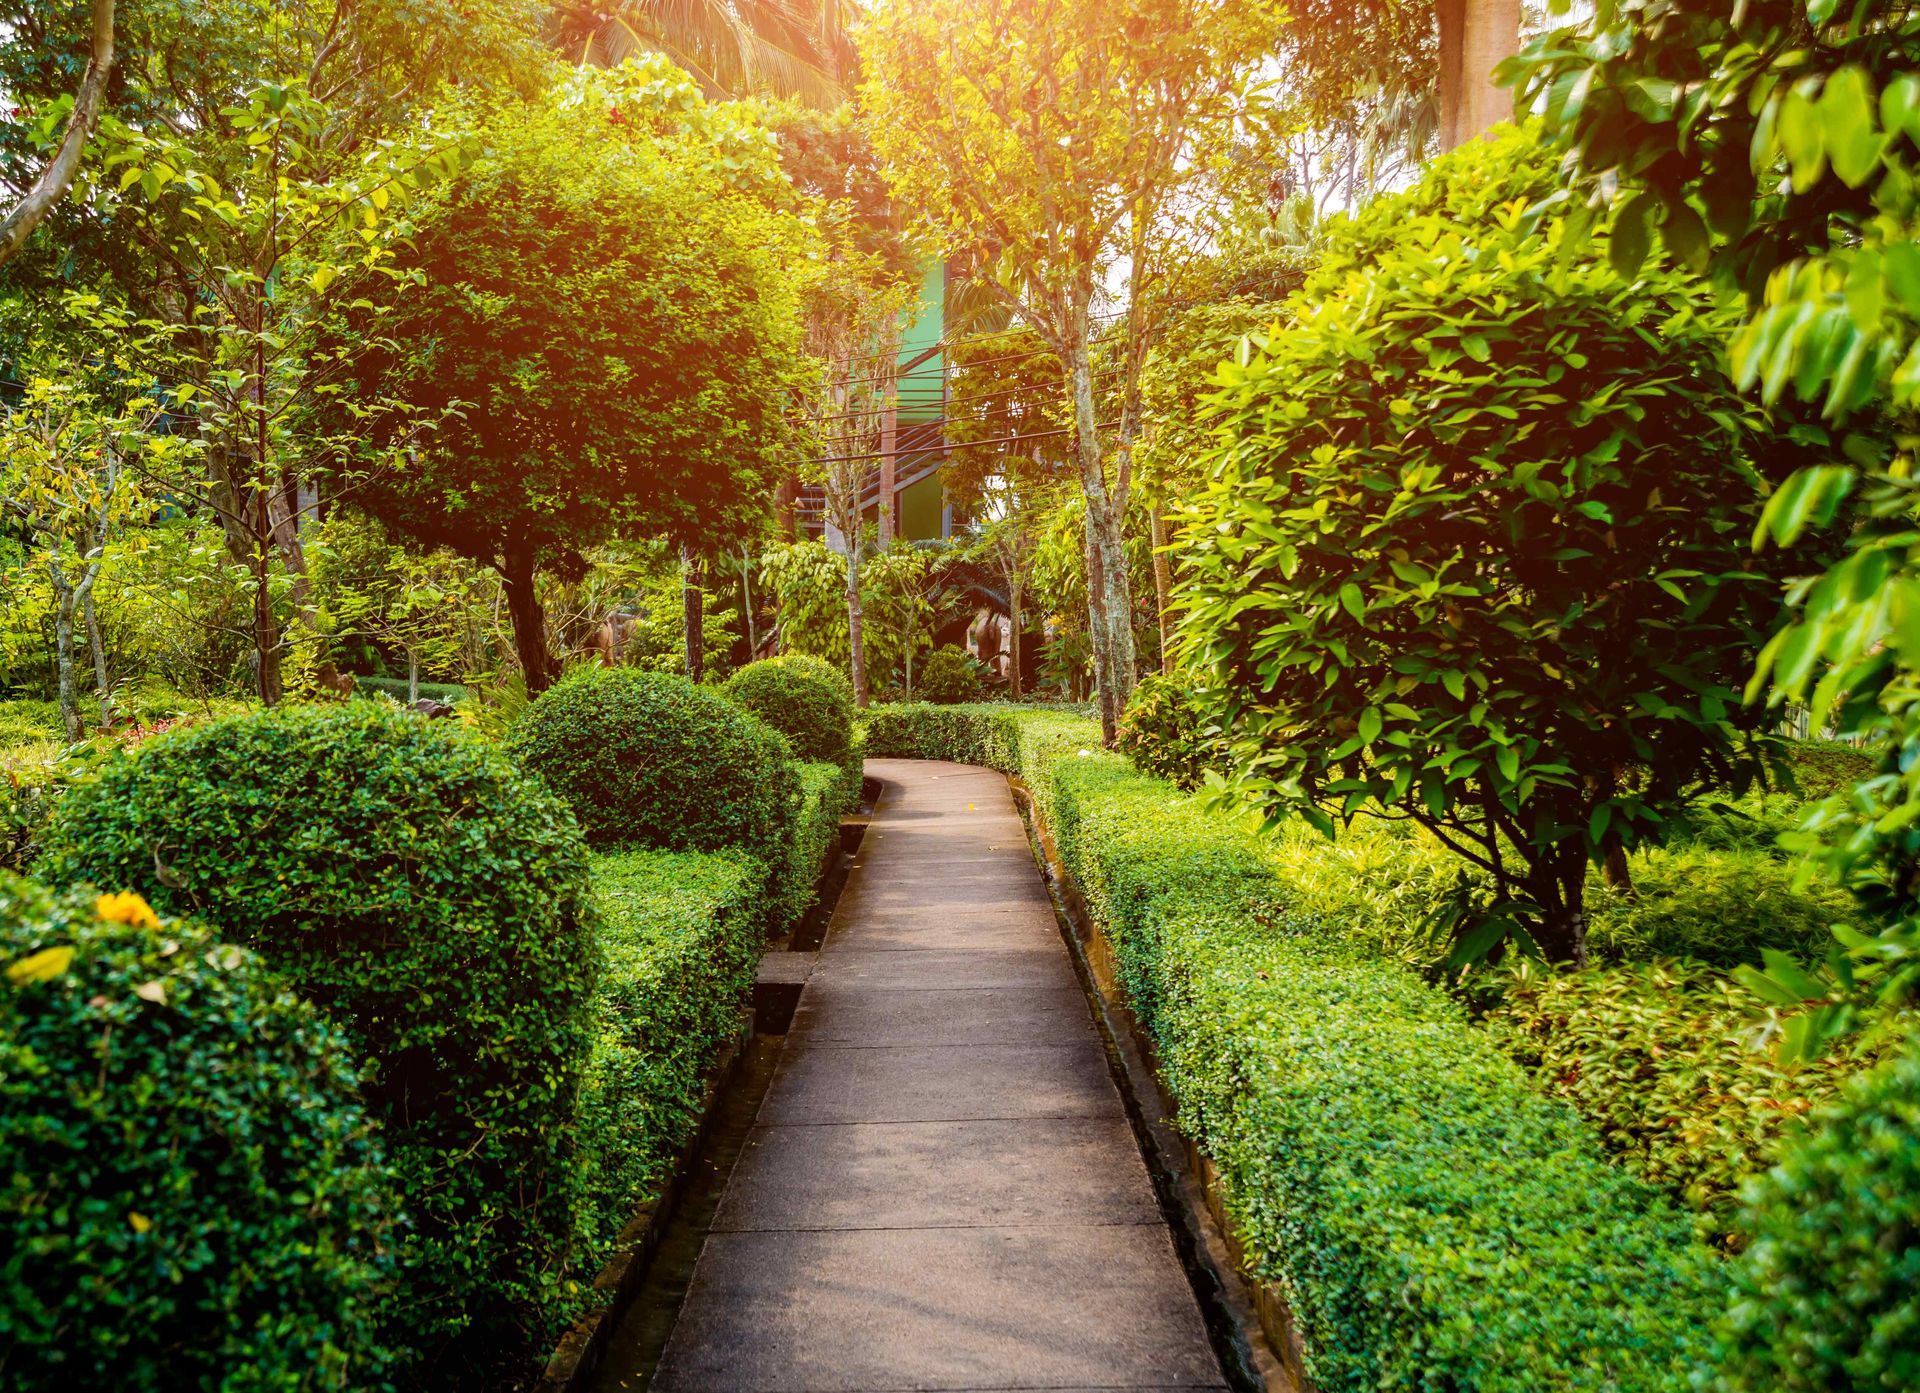 Scenic walkway with shrubs and trees